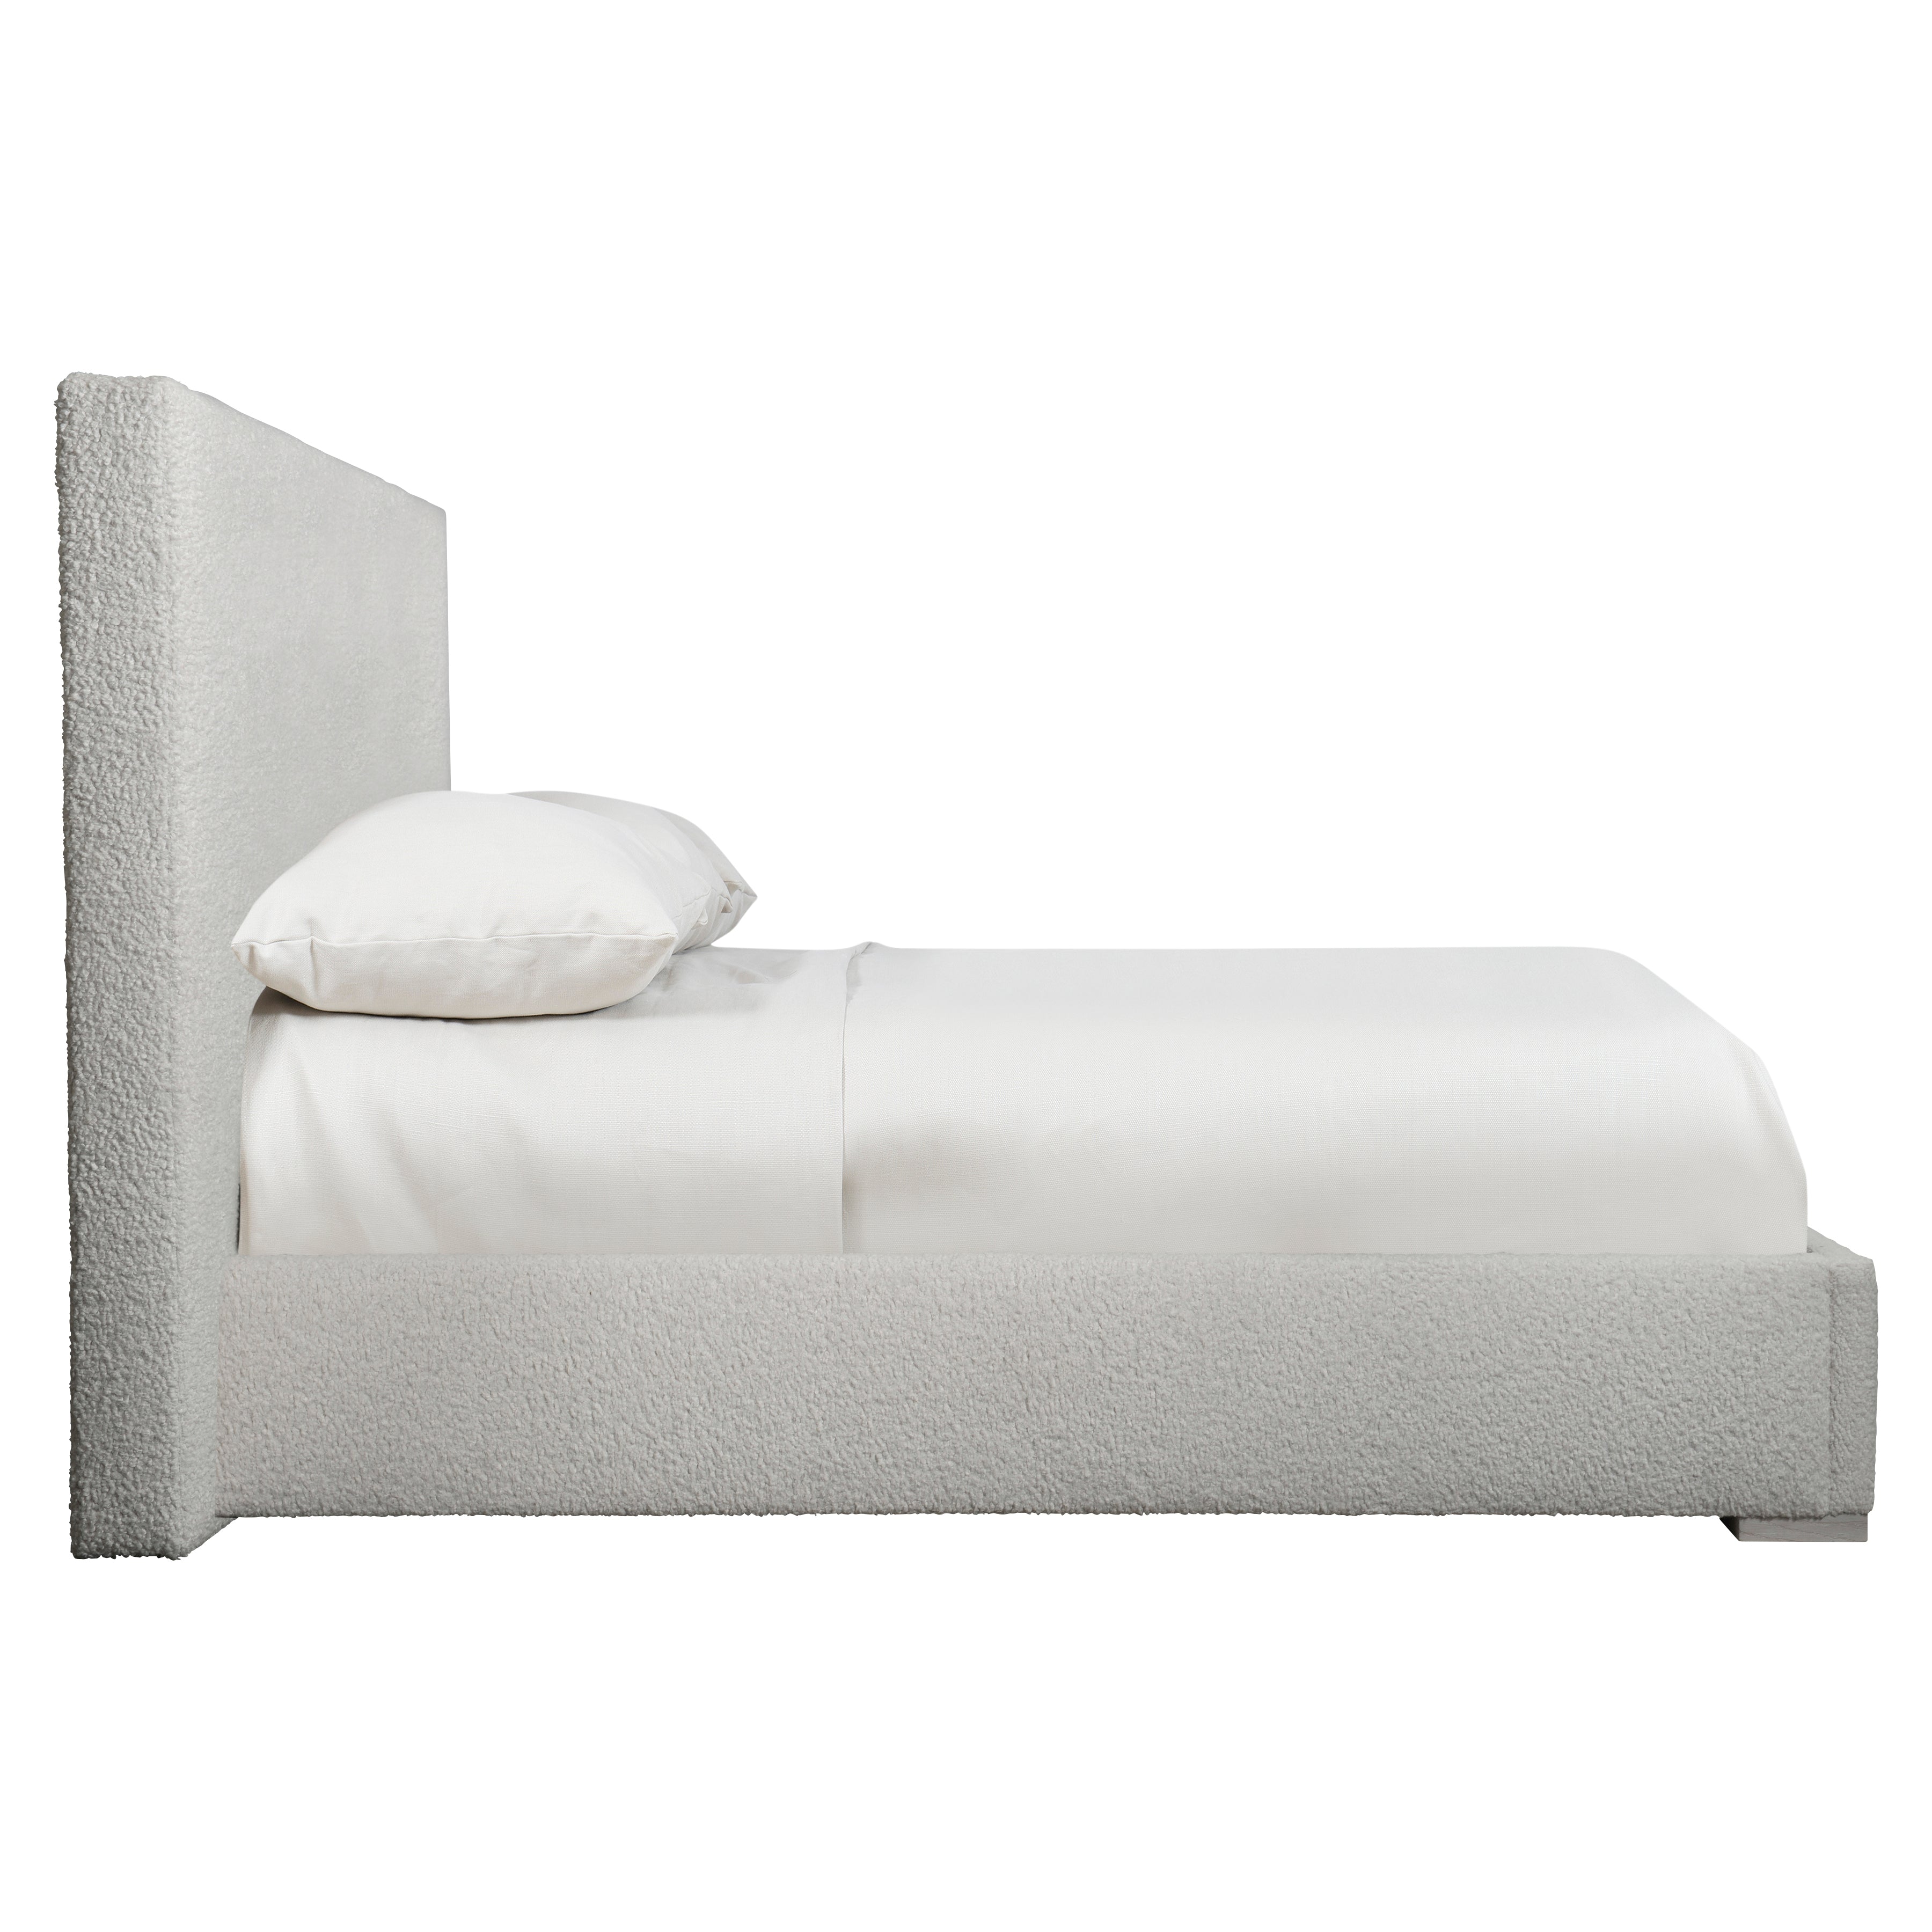 Solaria California King Fully Upholstered Panel Bed